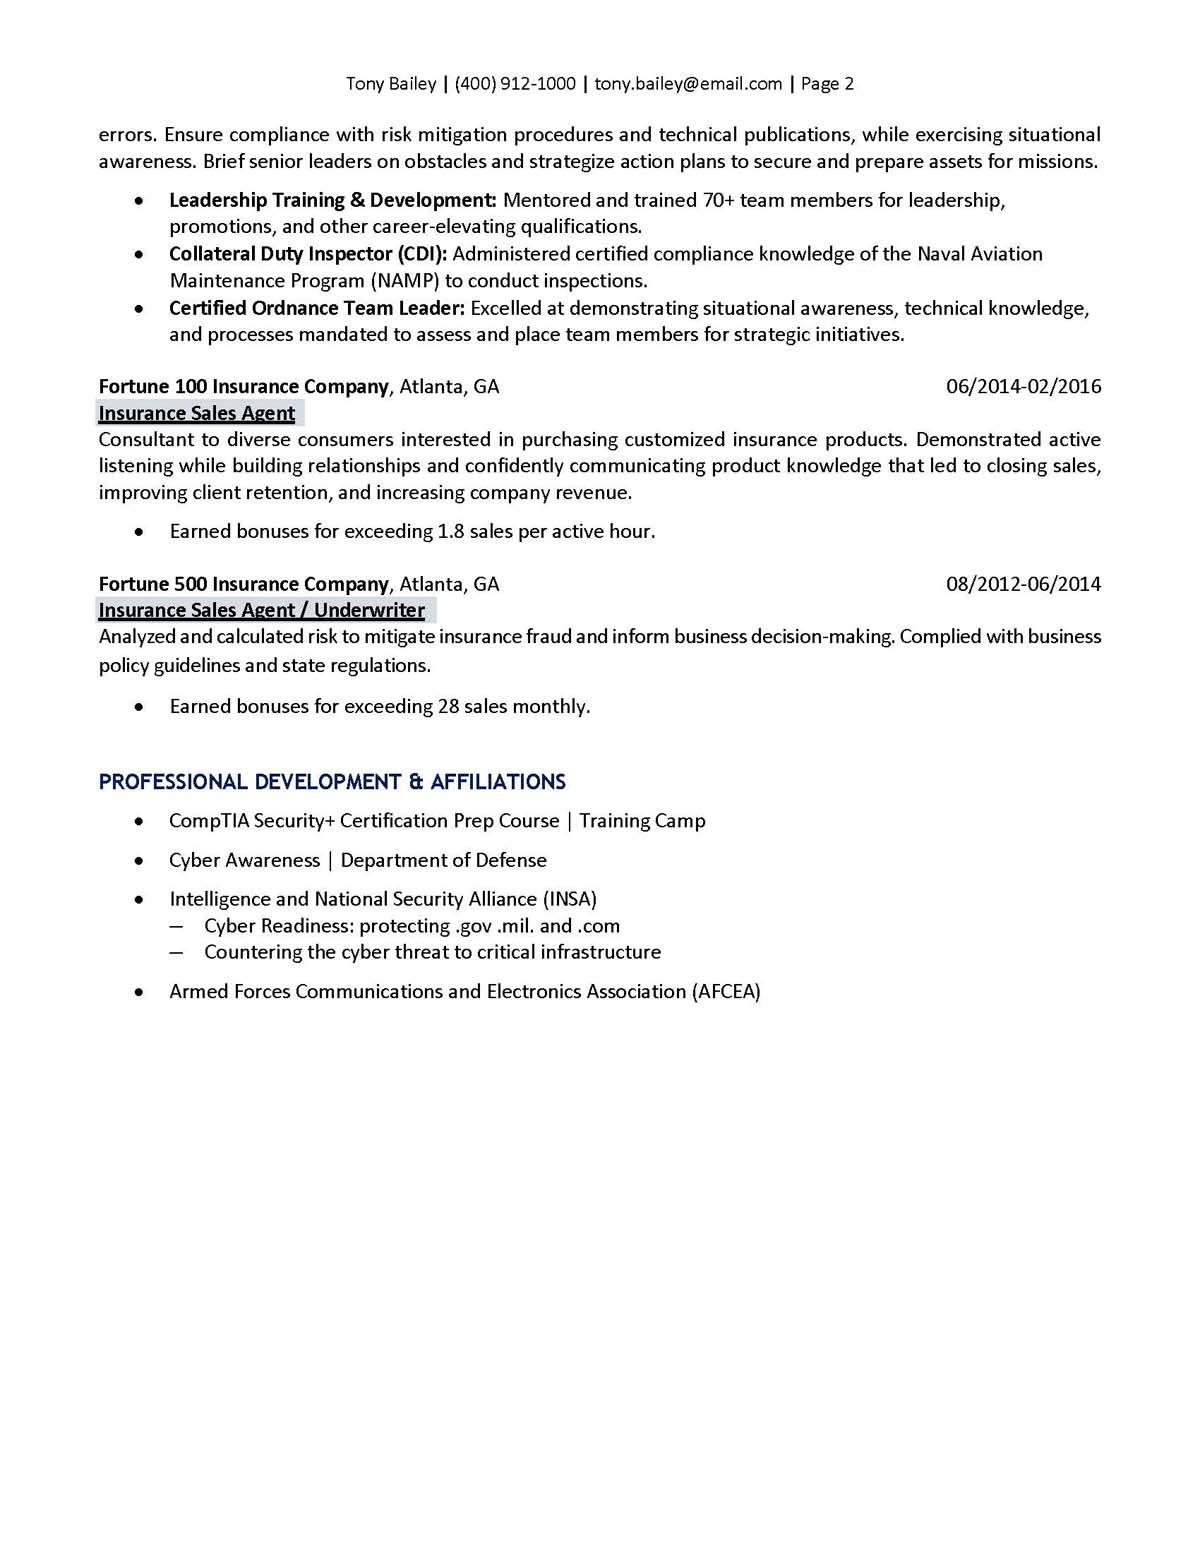 Sample resume: Information Technology, Mid Experience, Chronological